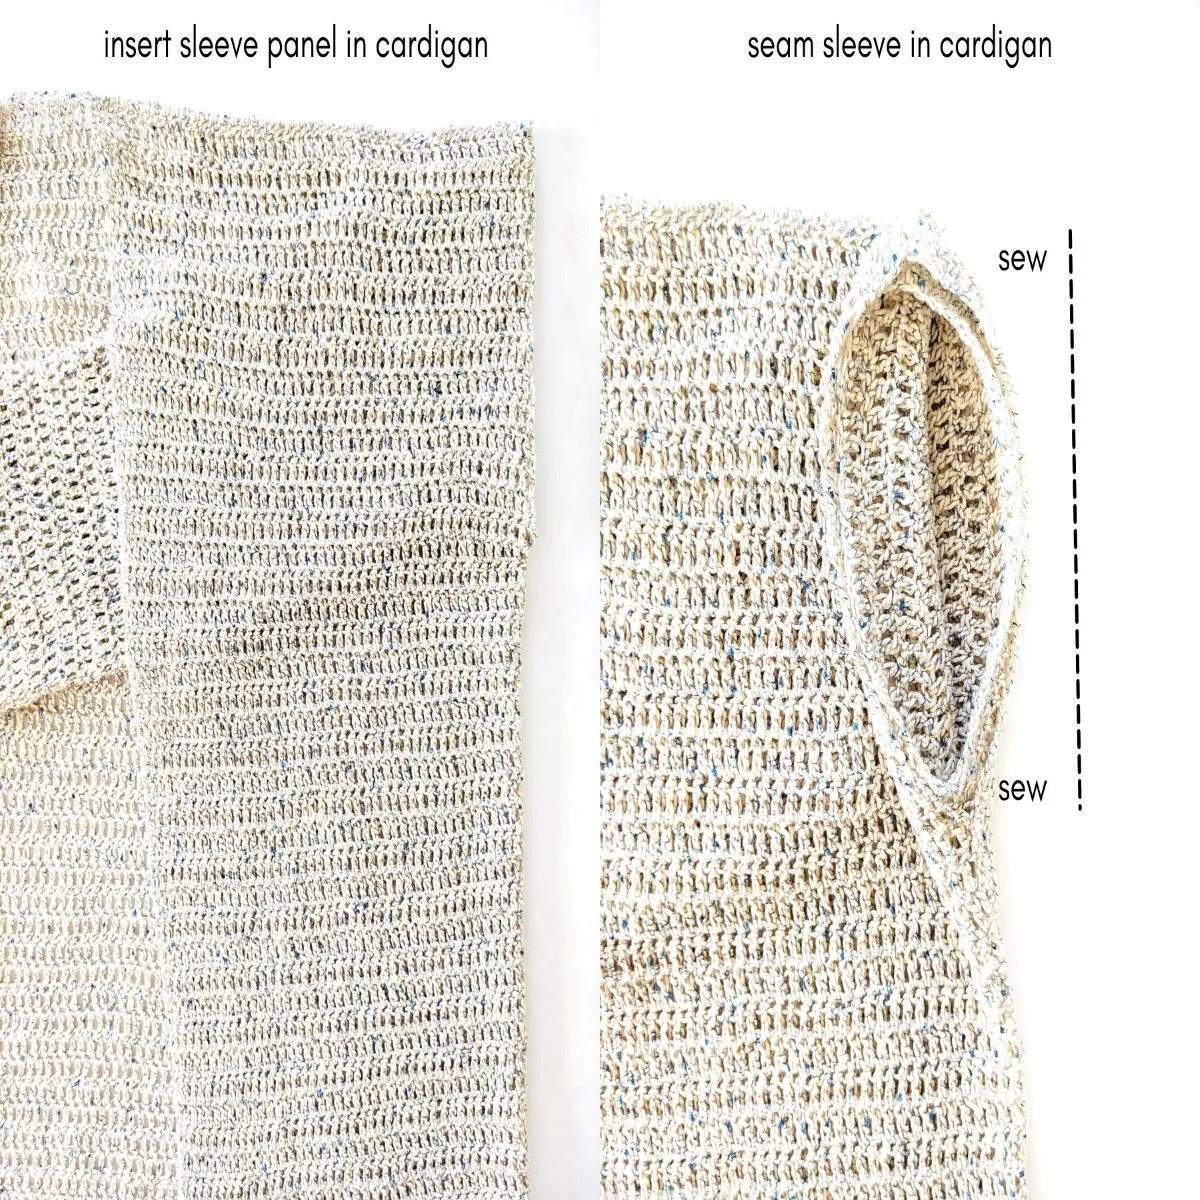 sewing your sleeve onto your cotton cardigan